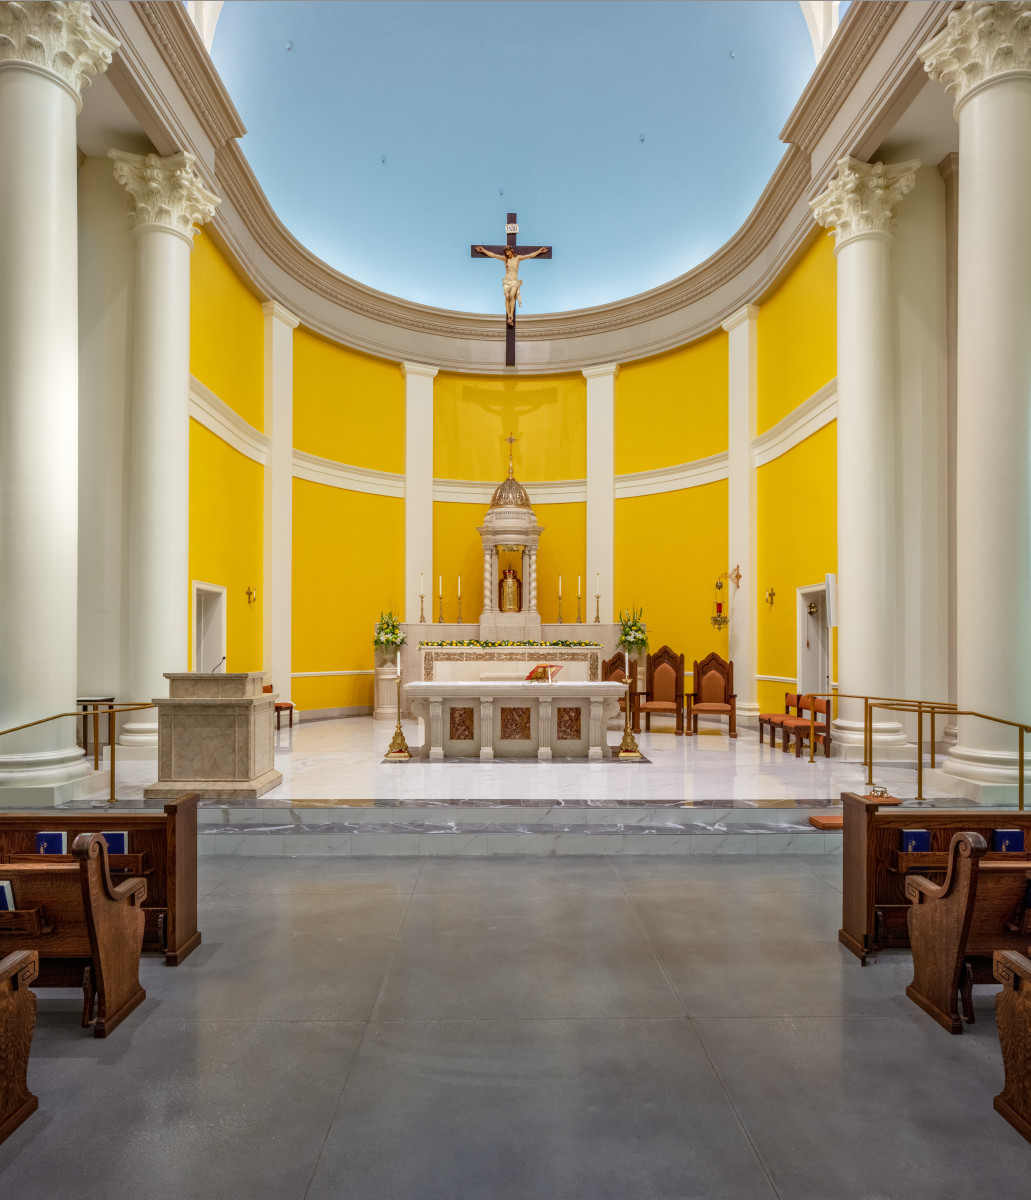 The two-color marble flooring was selected to complement the marble altar from St. Gerard’s.